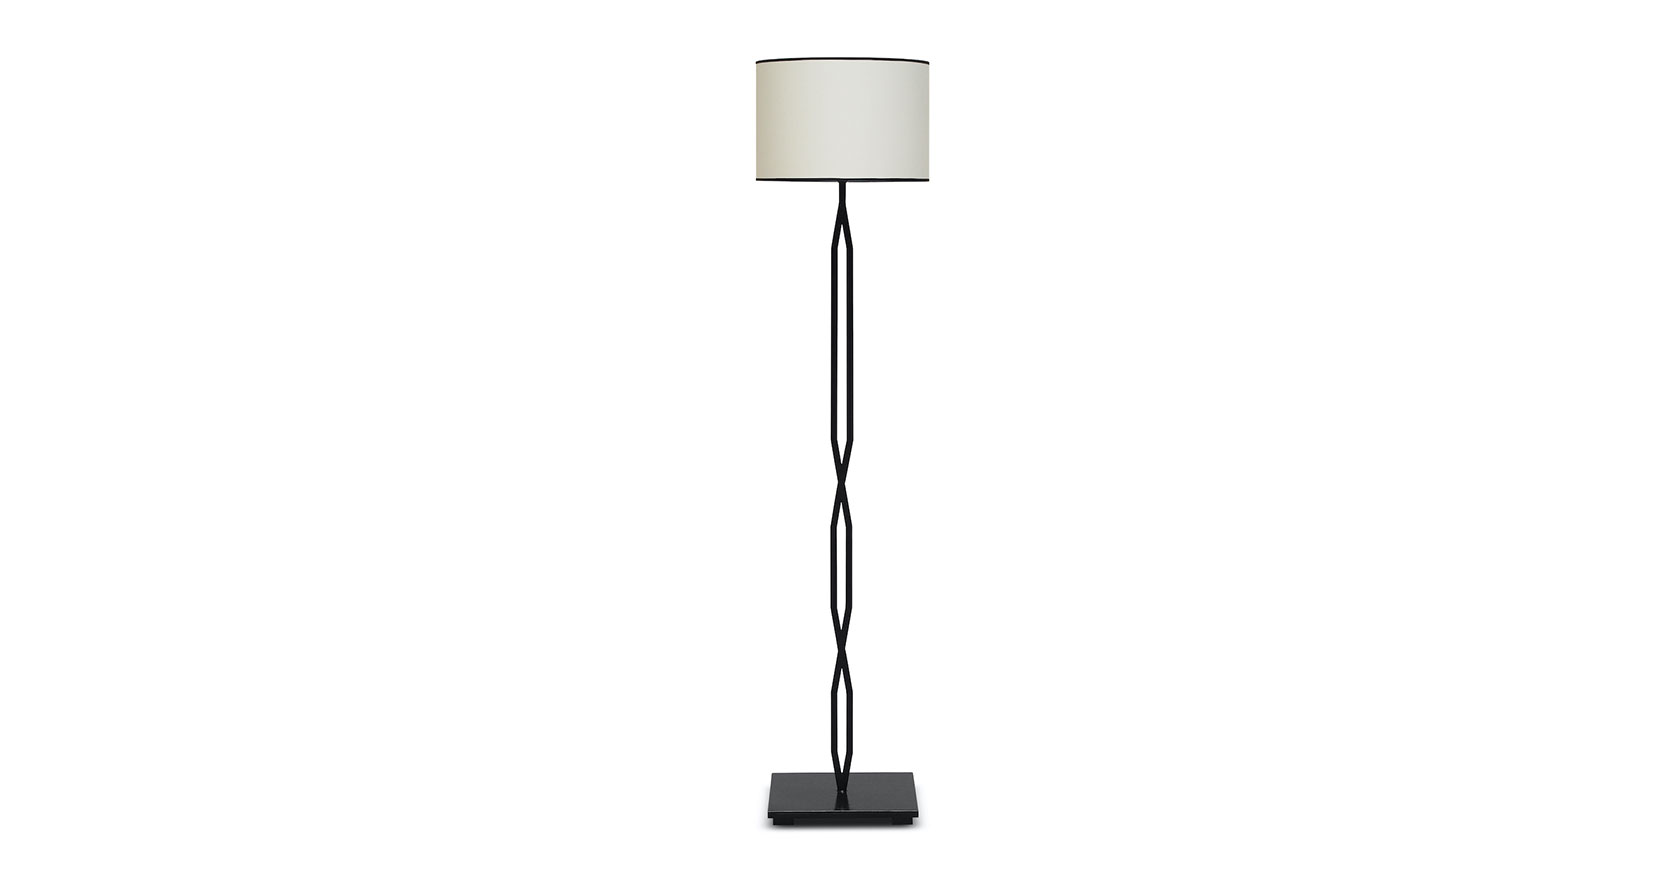 Eric Jourdan, floor lamp in black wrought iron, square base, stem made up of 3 intersecting geometric shapes, round white shade with black braid